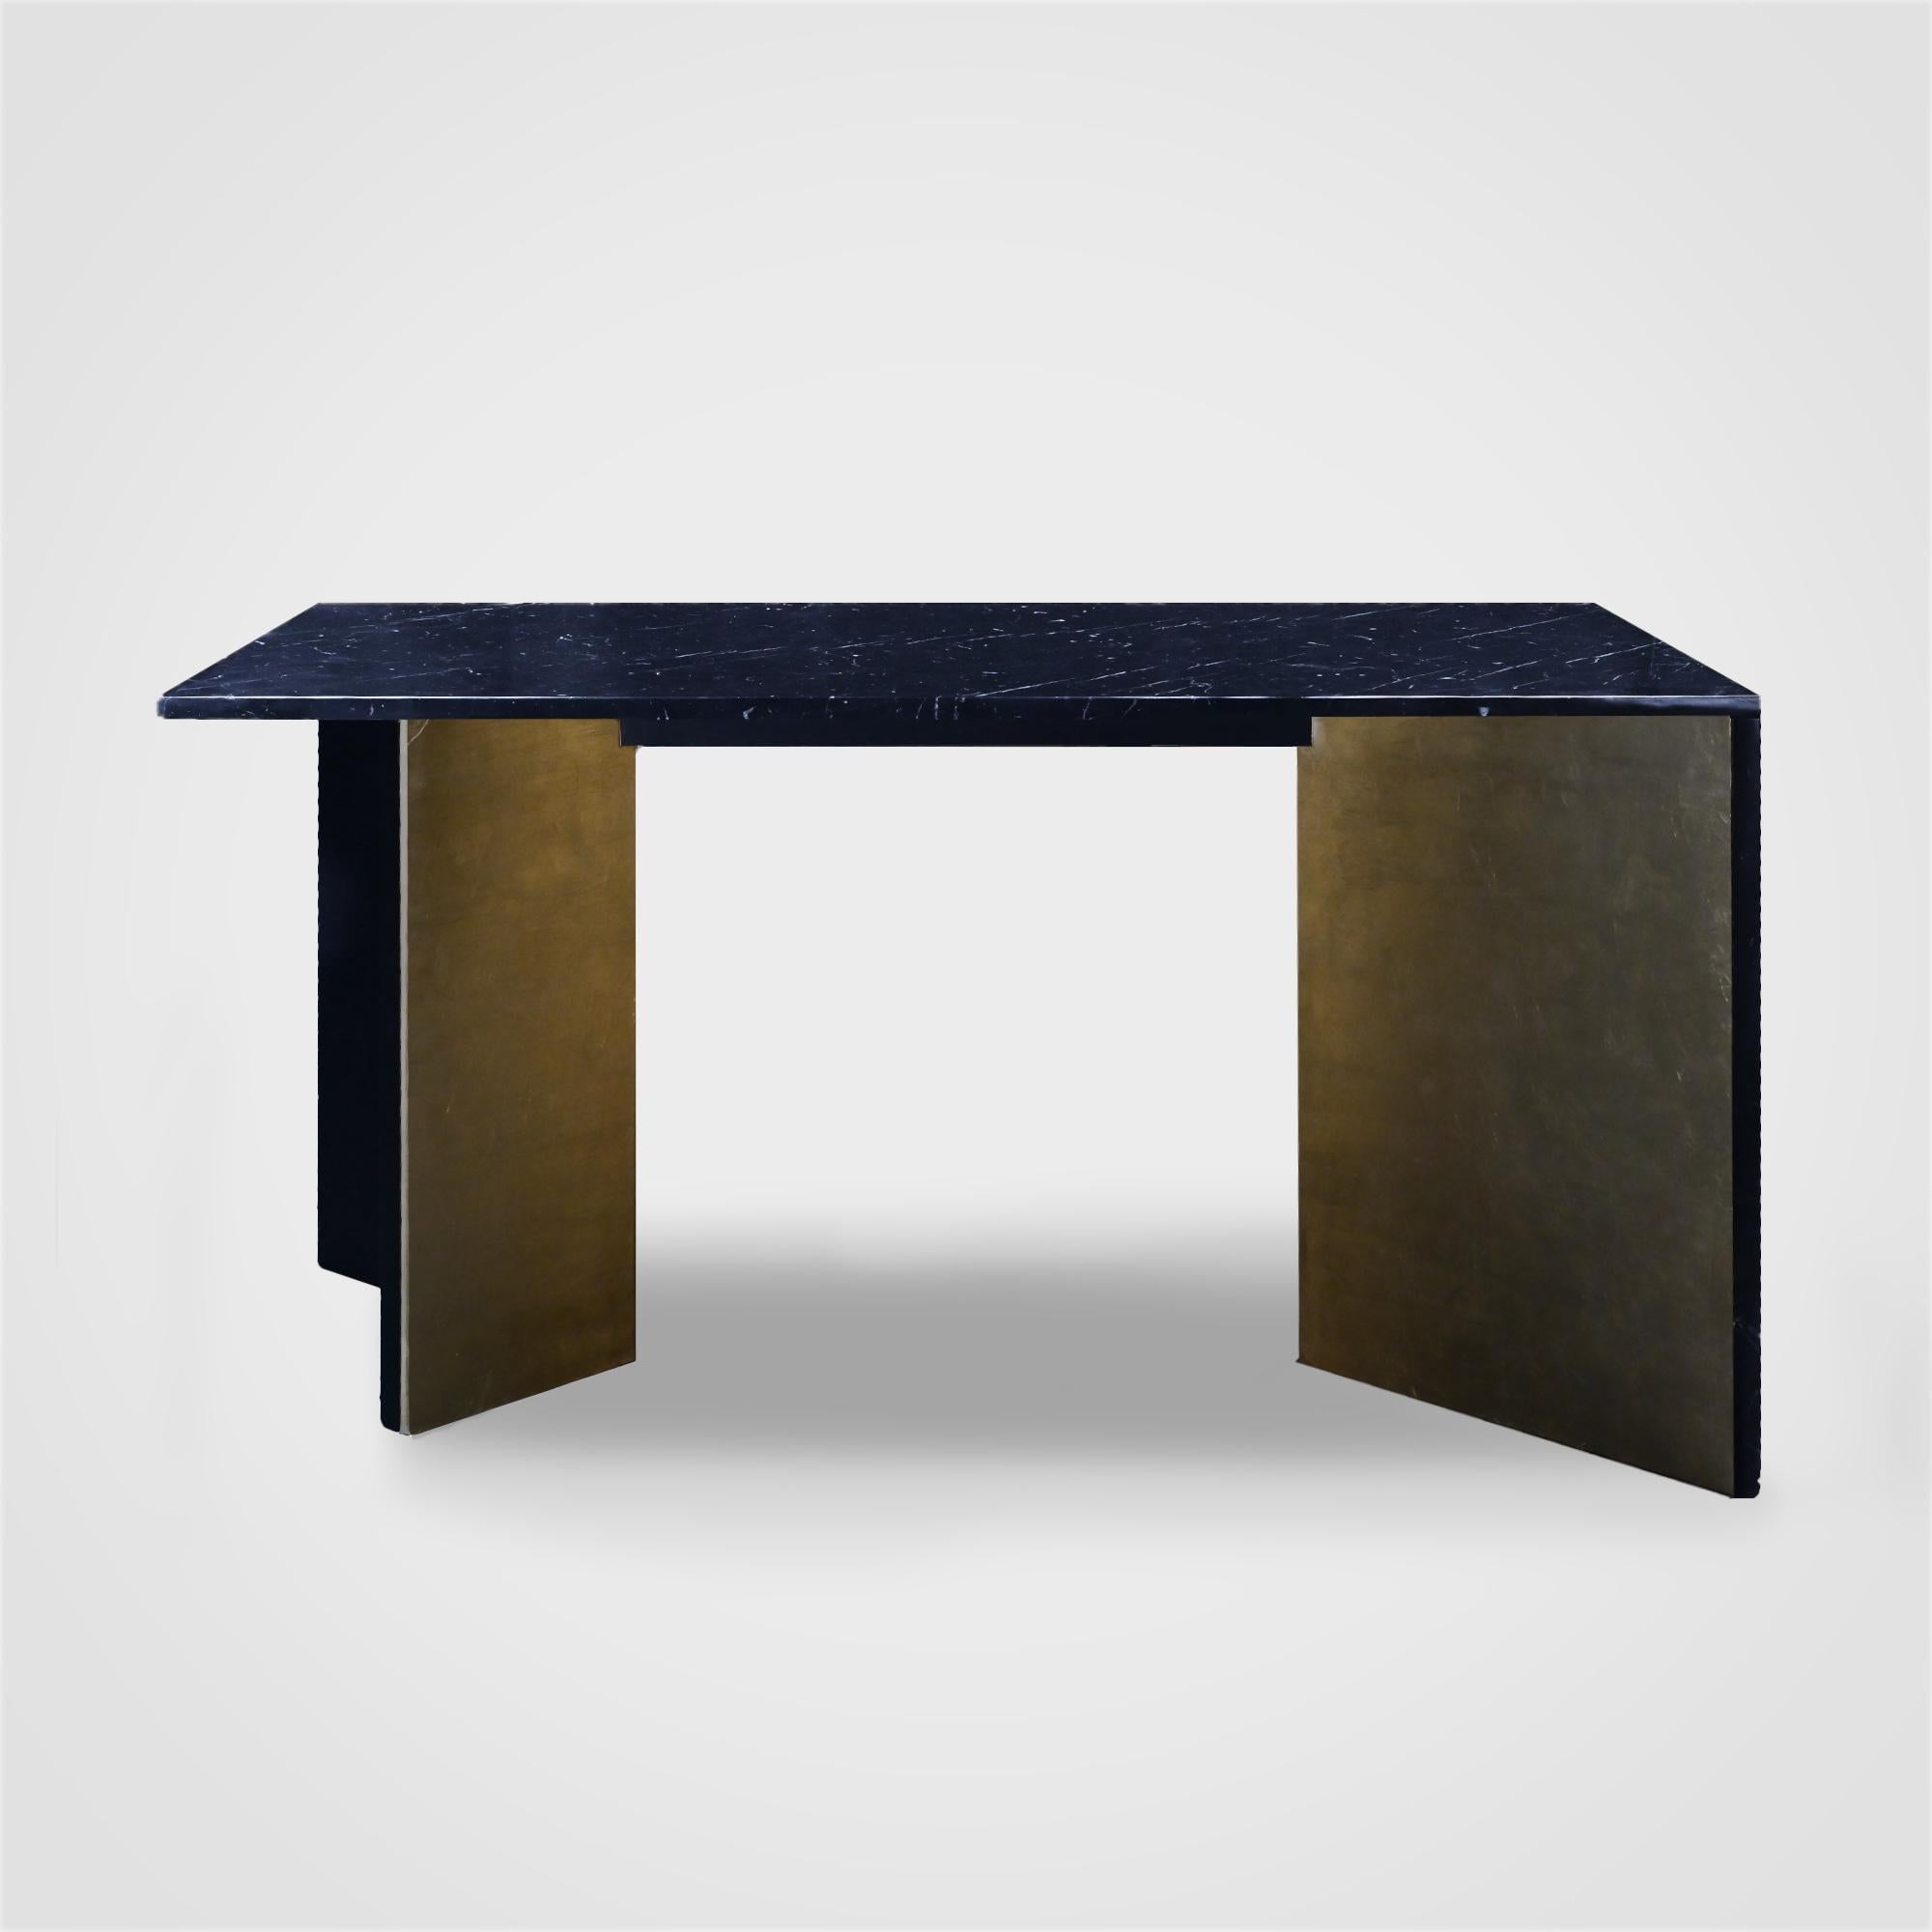 Refined beauty in its element, the Scorcio Dining Table is made of Nero Marquinia marble and Steel , with the legs adorned in gold leaf. Depending on the viewer's perspective, the symmetry of the legs creates a unique opening that acts as a visual